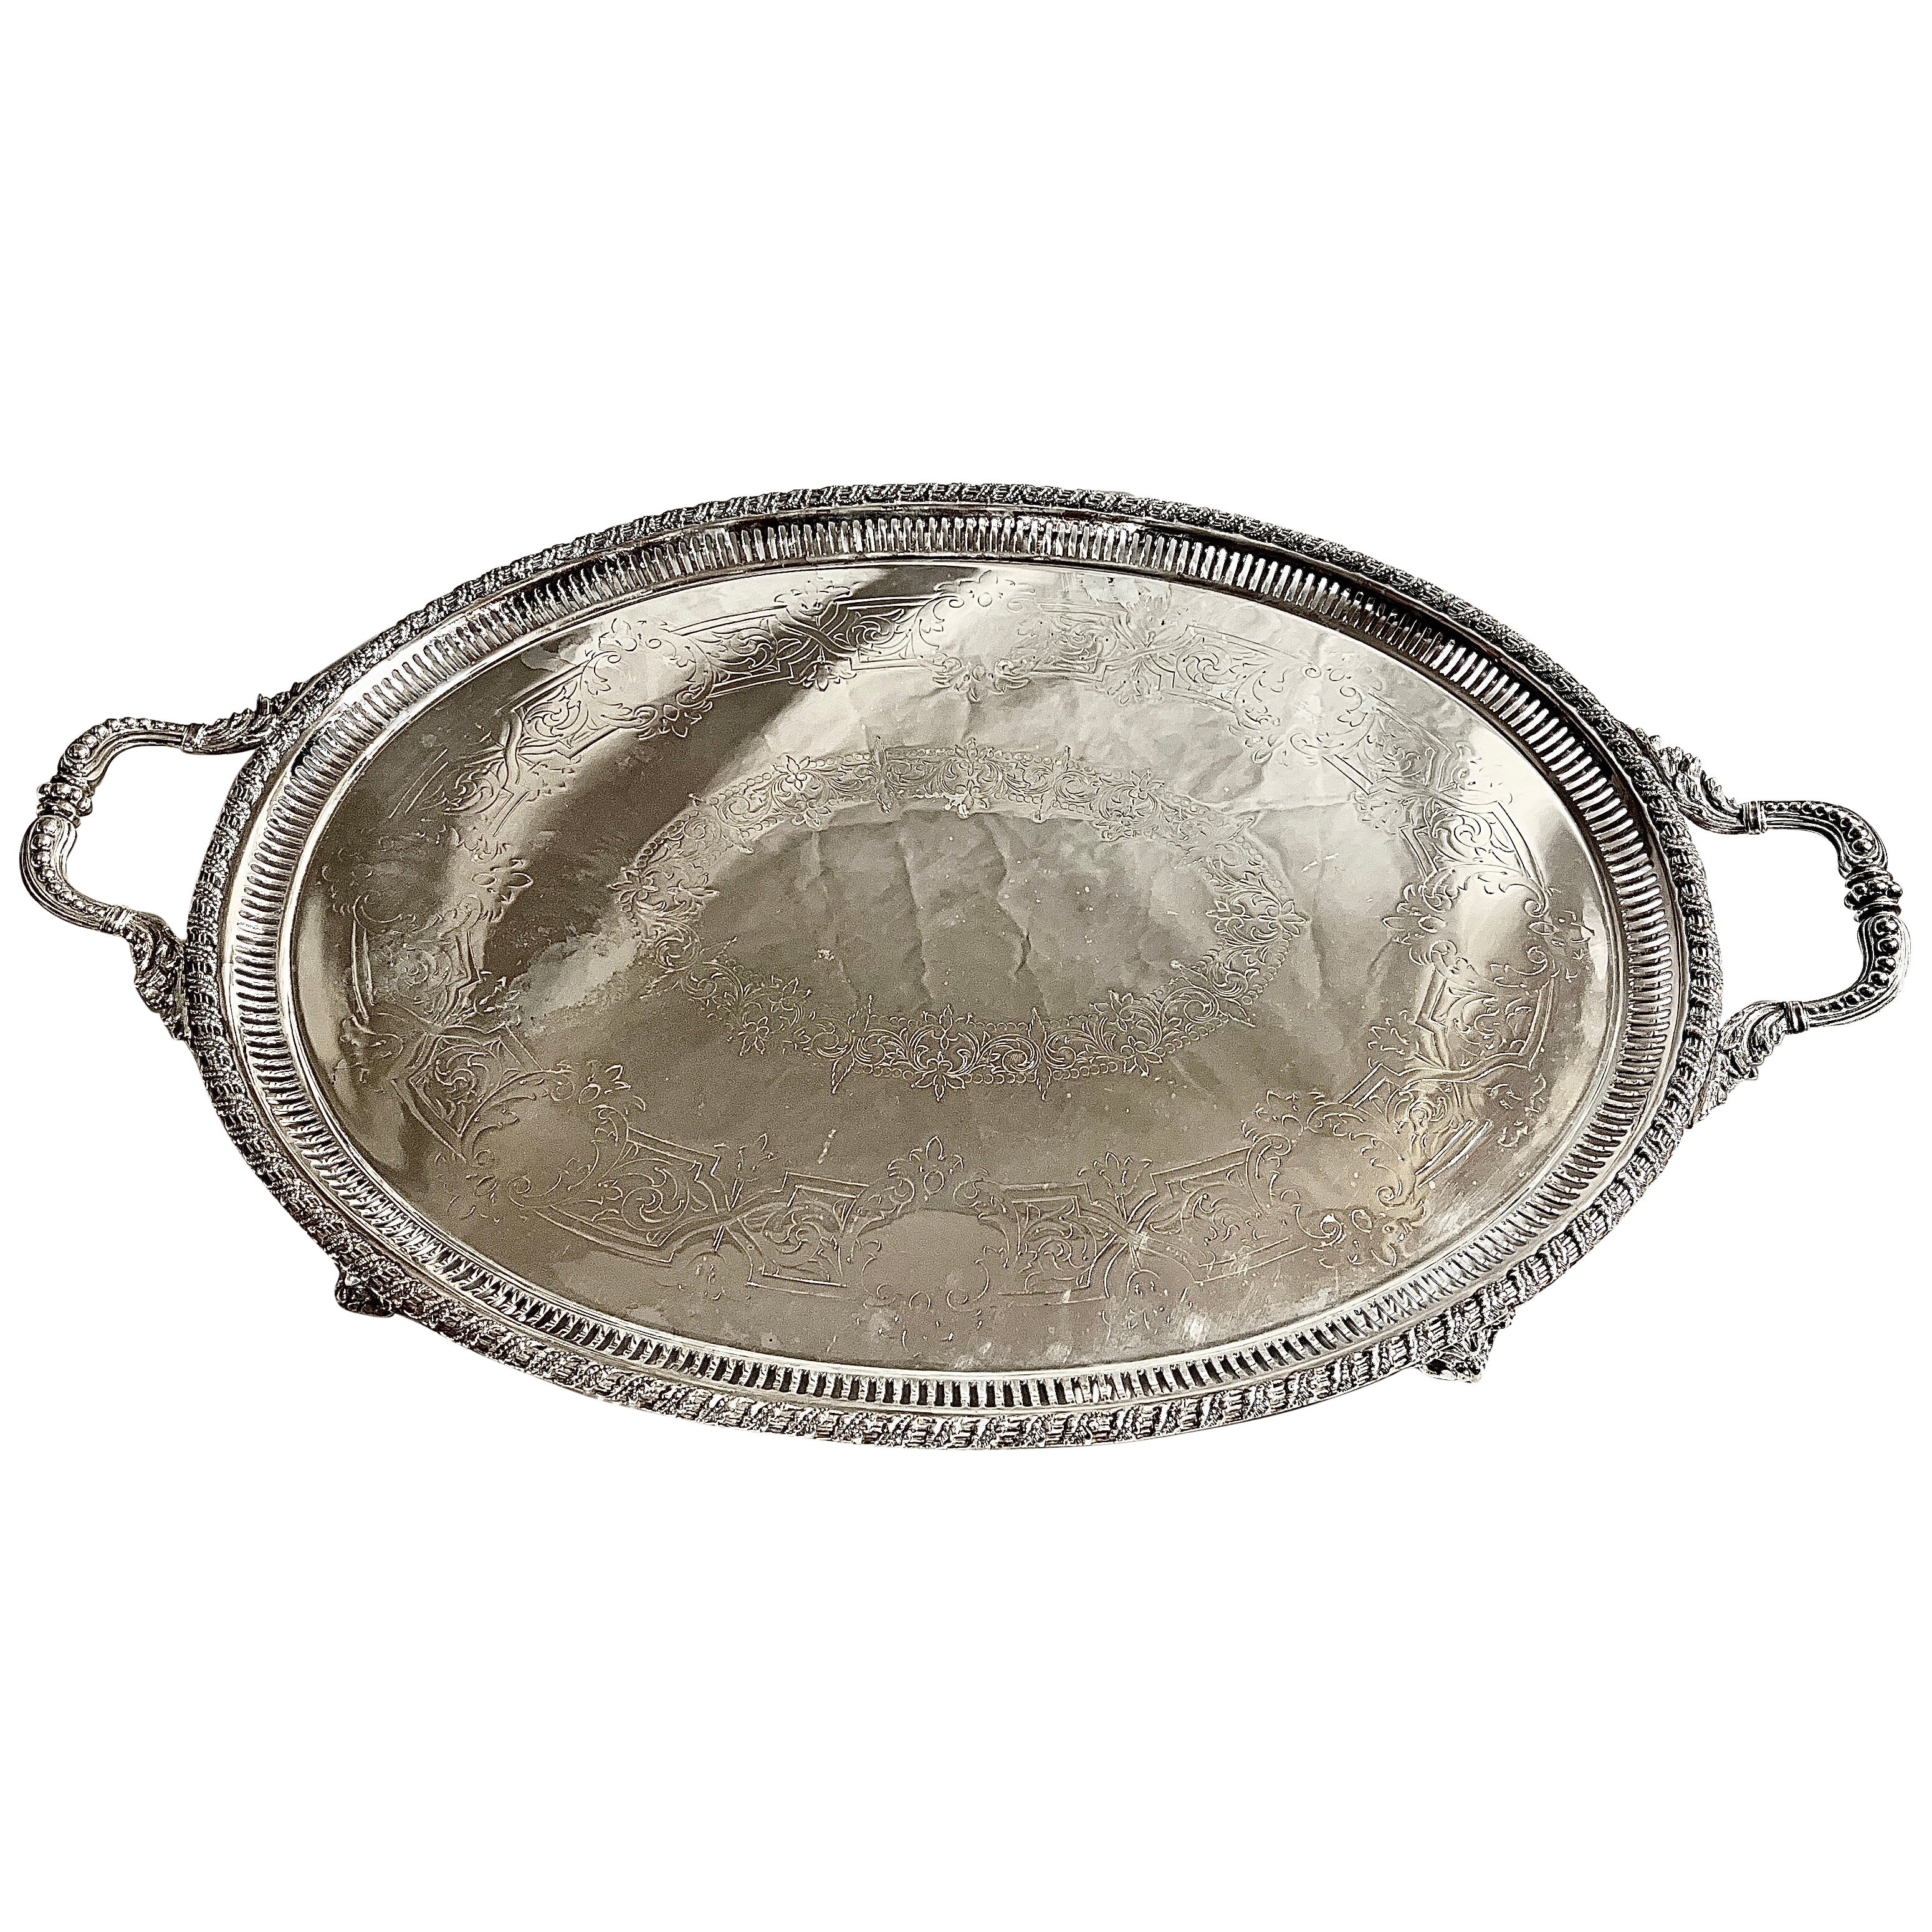 Antique English Sheffield Silver Footed Tray with Openwork Edge, Circa 1890.